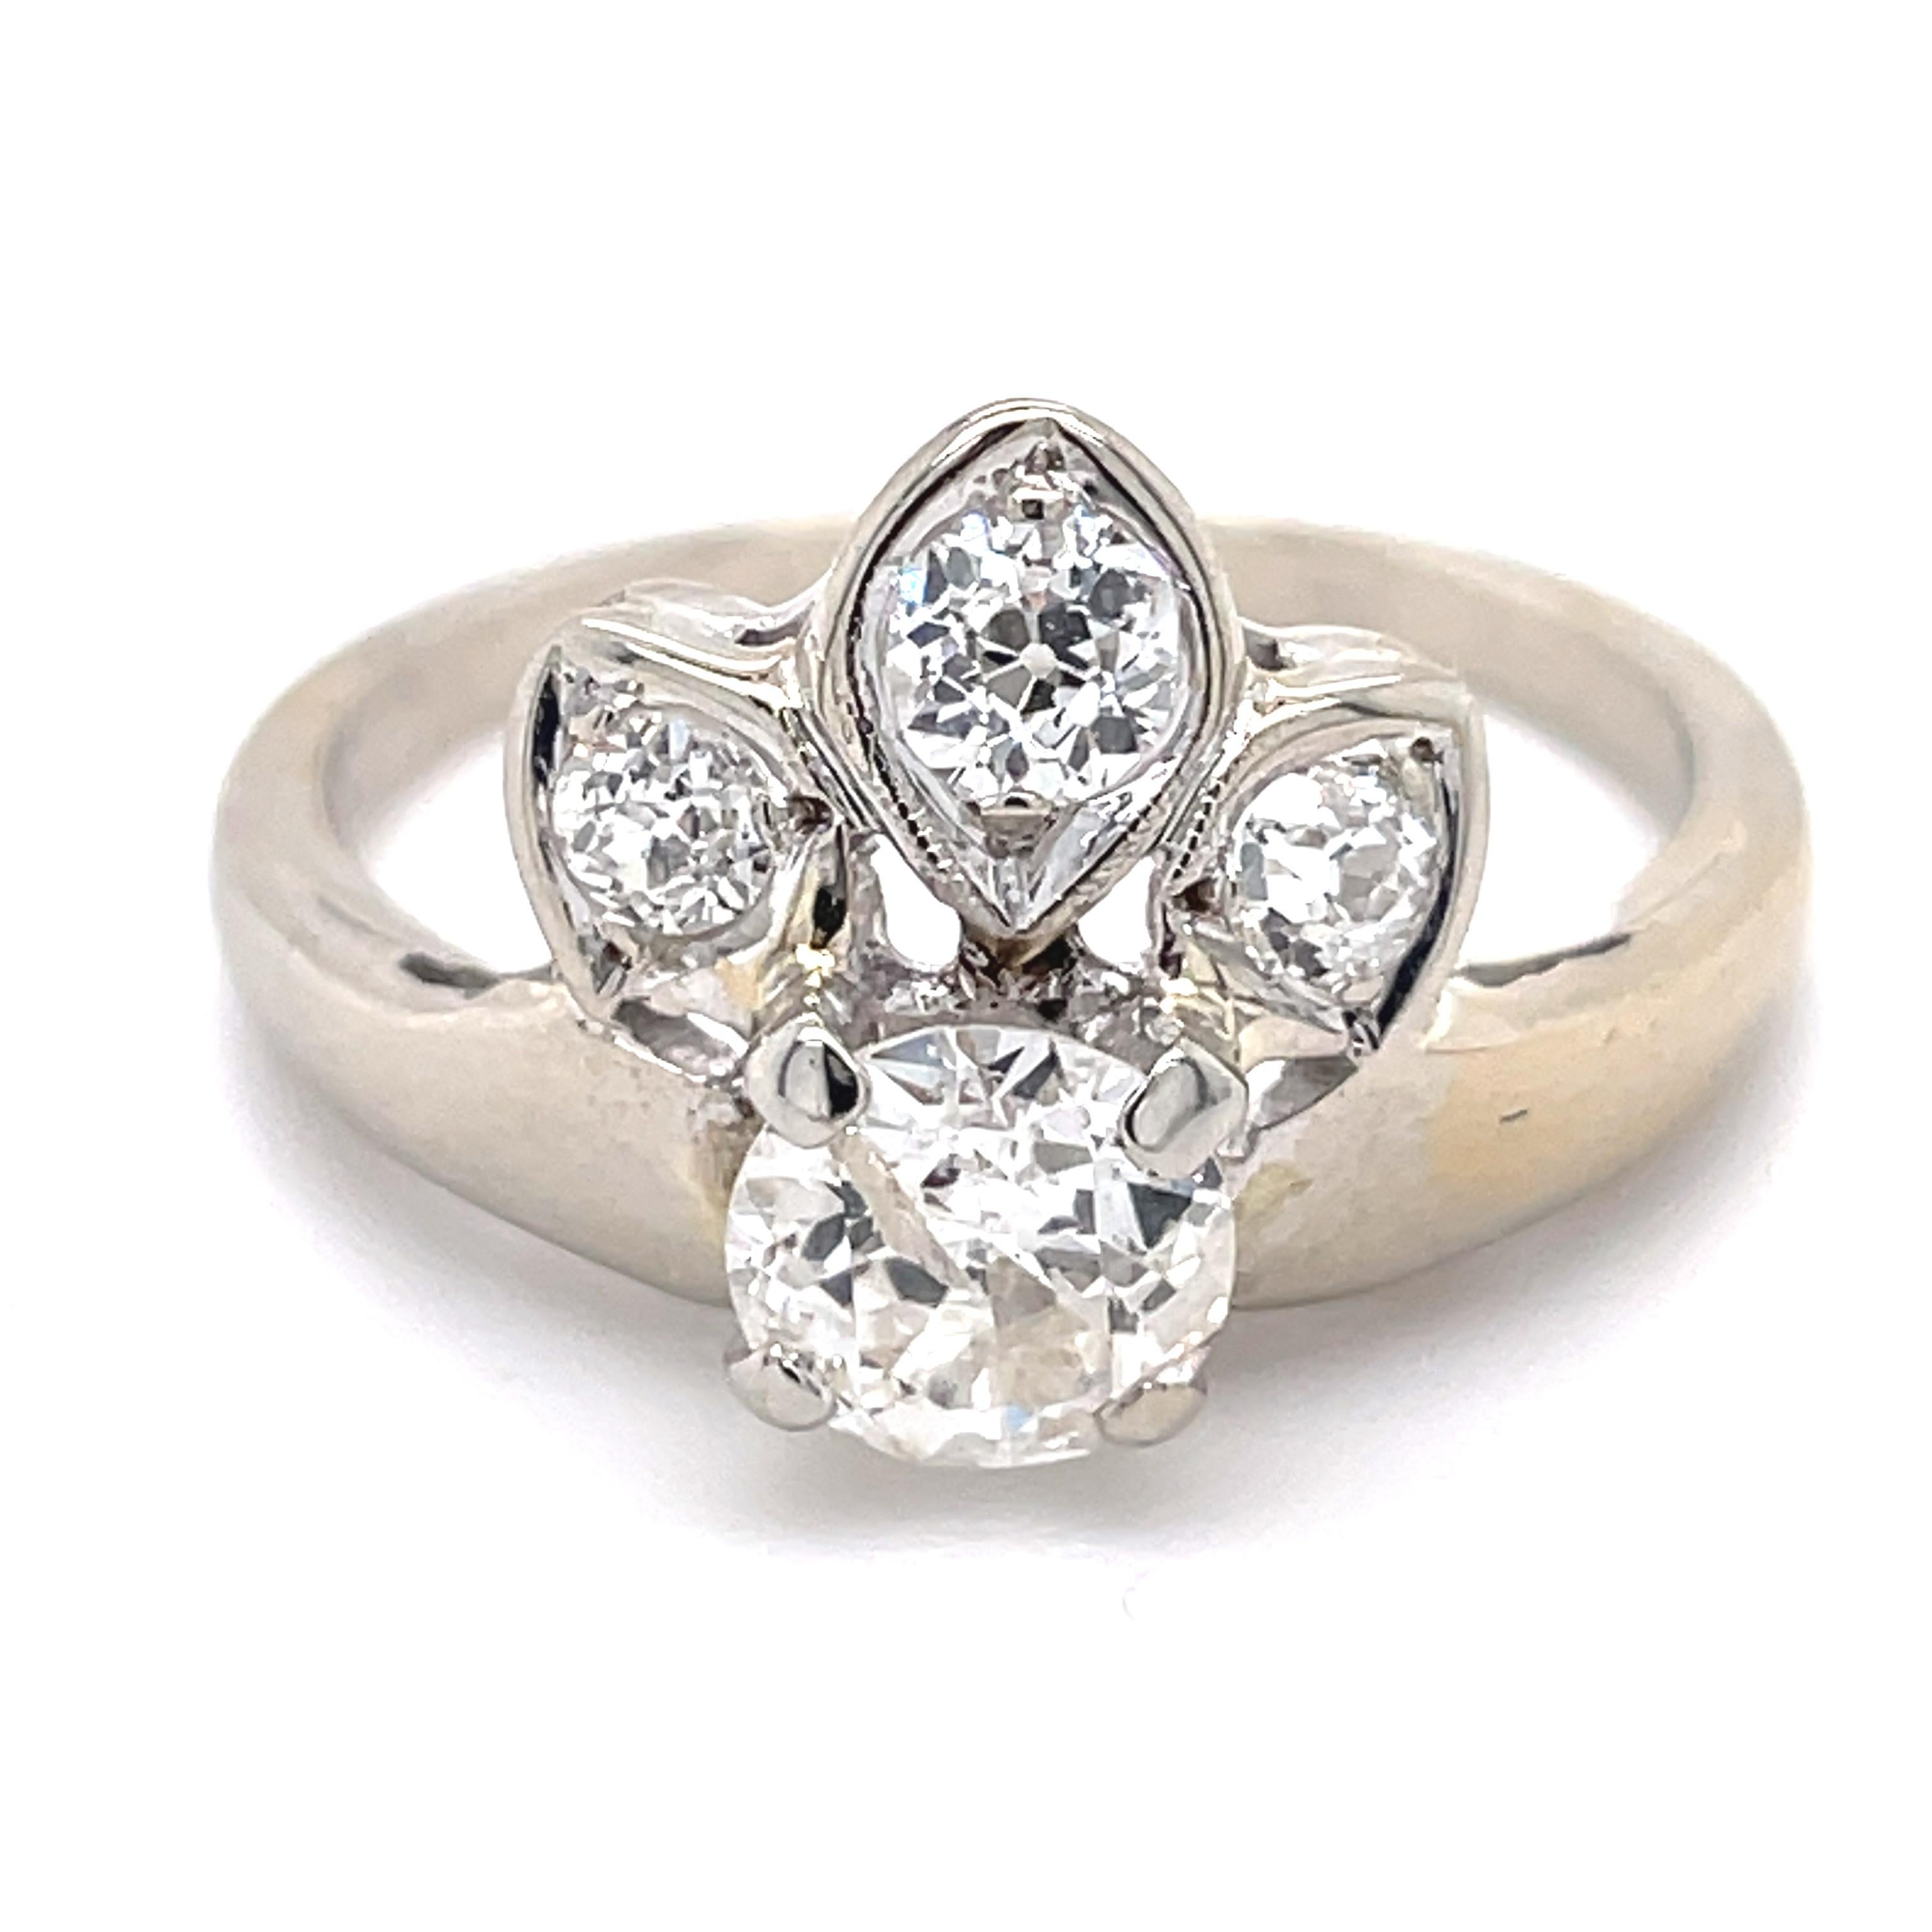 Vintage Engagement Ring - 1CT Old European Natural Diamonds, 14k White Gold


~~ S e t t i n g ~~
Solid 14k White Gold
3.25  grams
Ring Size 6.75 US
 
~~ Stones ~~

Main Stone:
Old European Natural Diamond In Weight Of 0.7 Ct (Approx.)
Clarity -